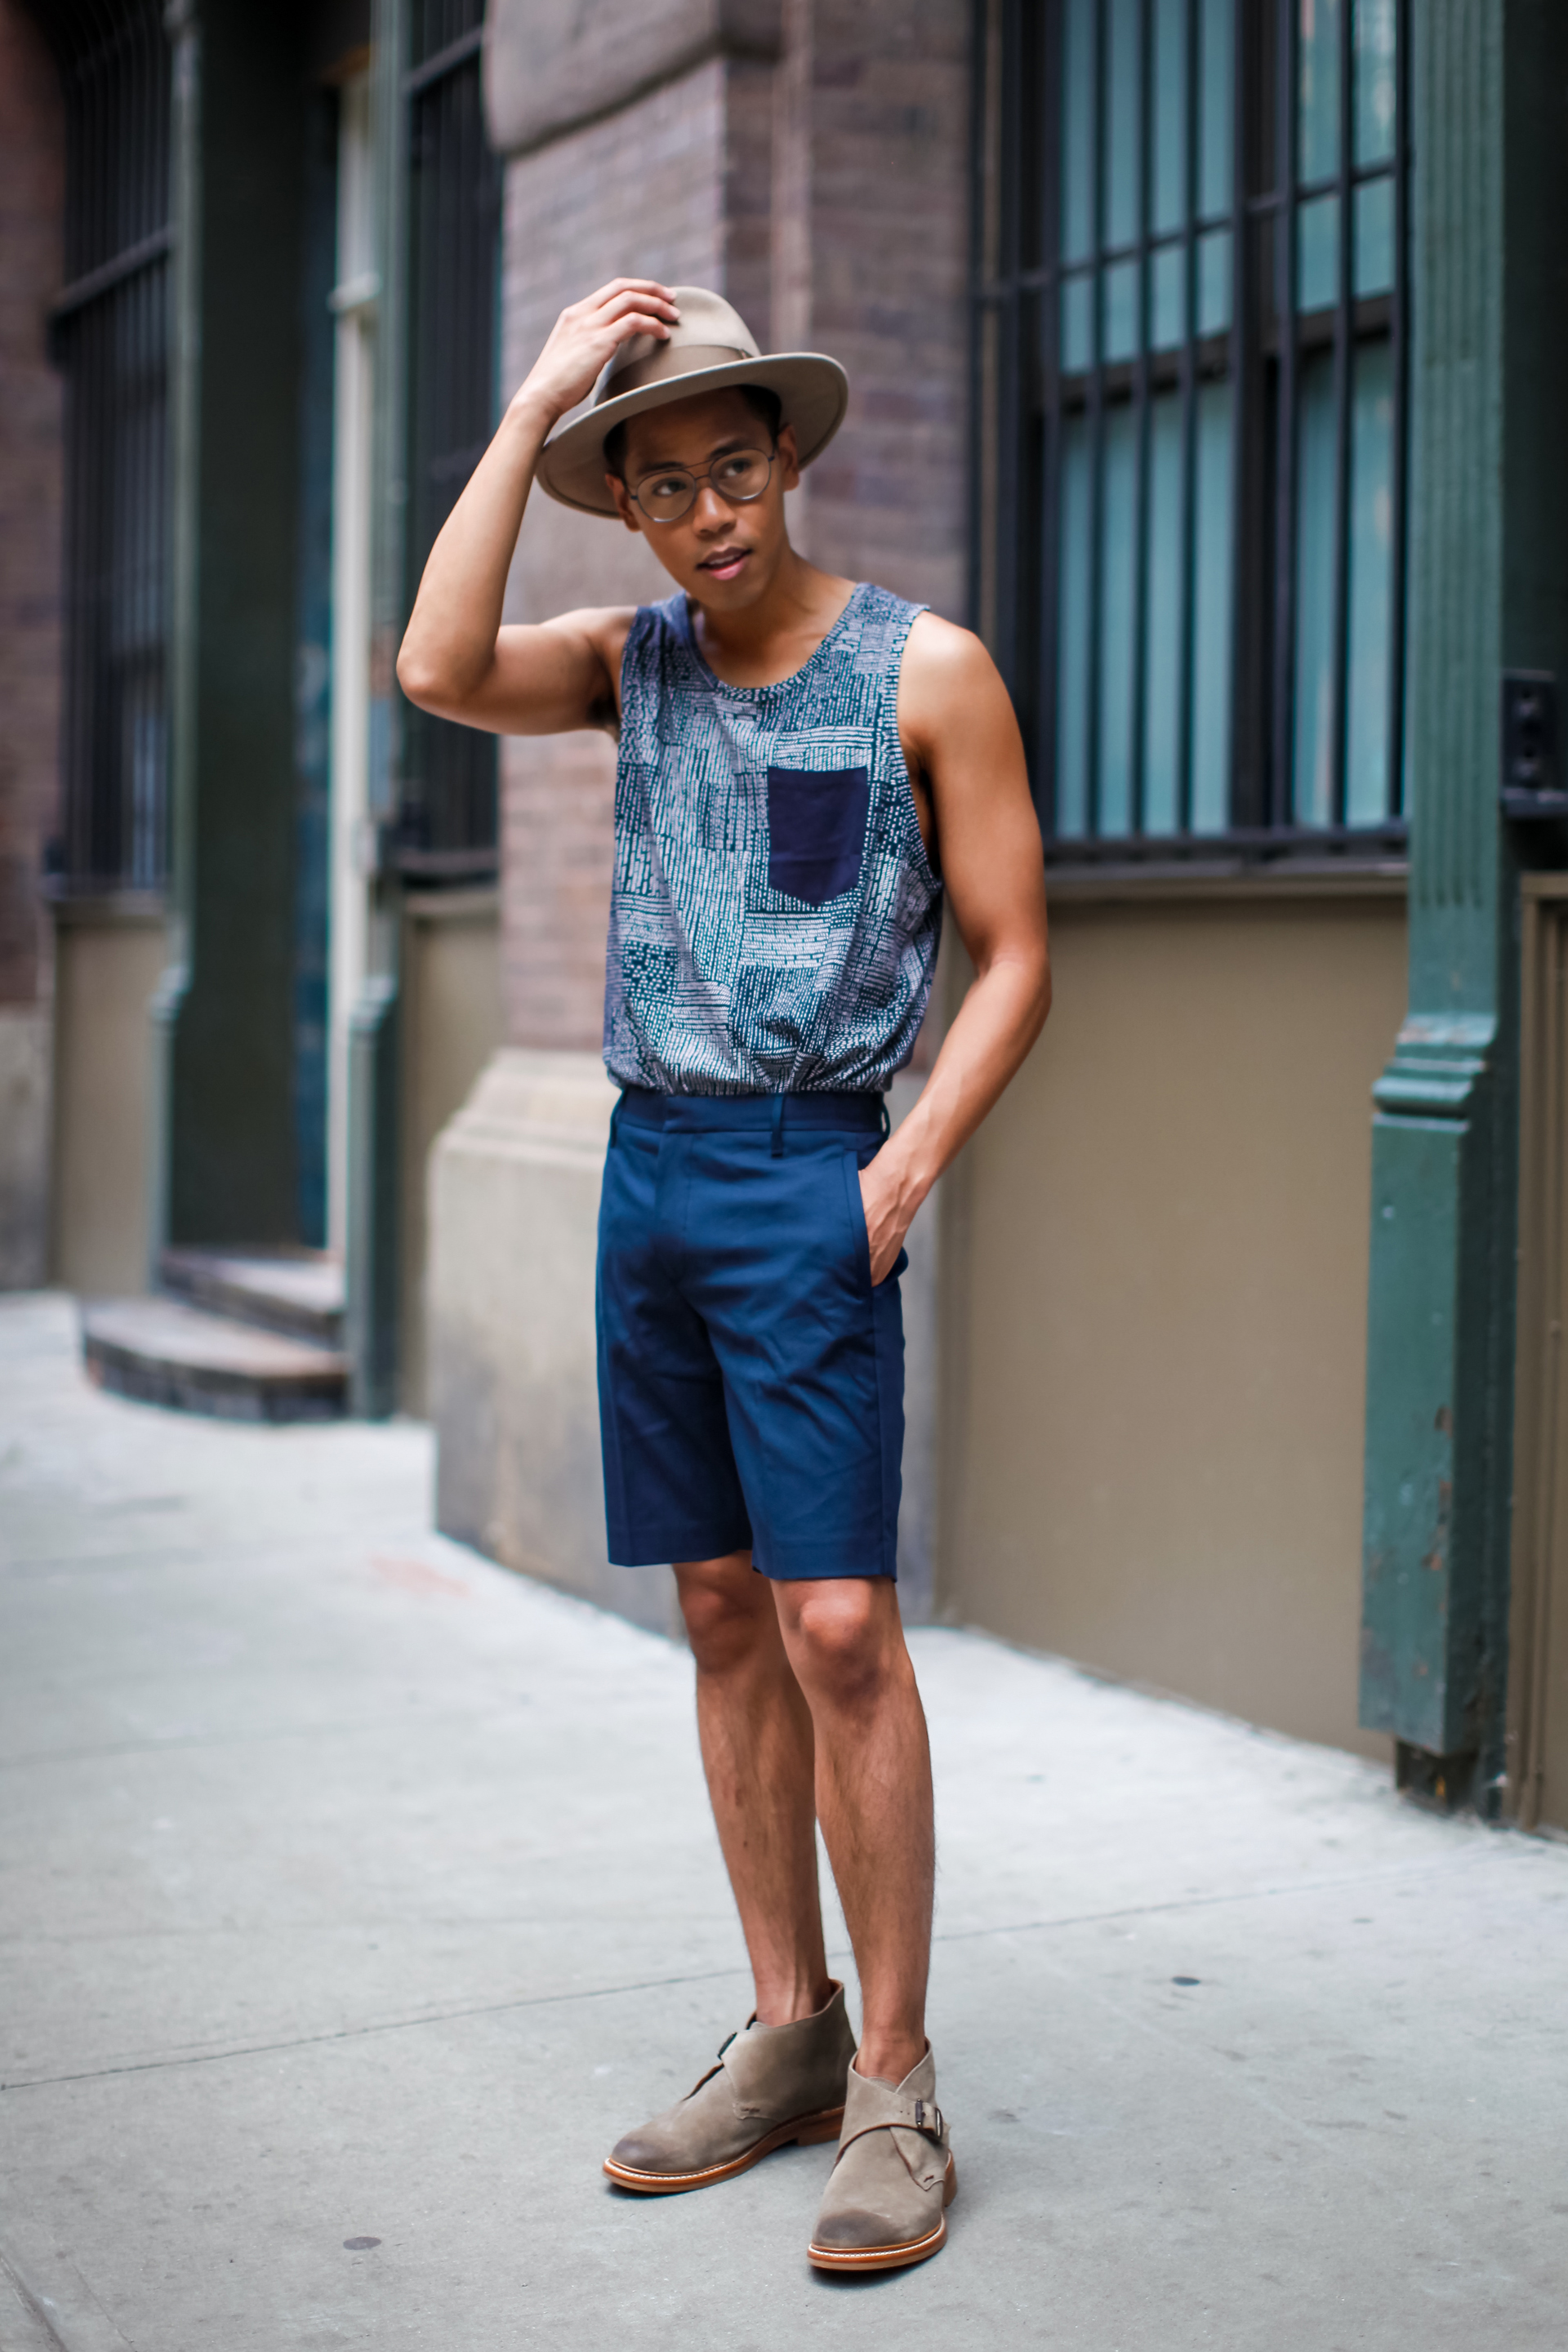 oh anthonio - Anthony Urbano - men's tank top outfit